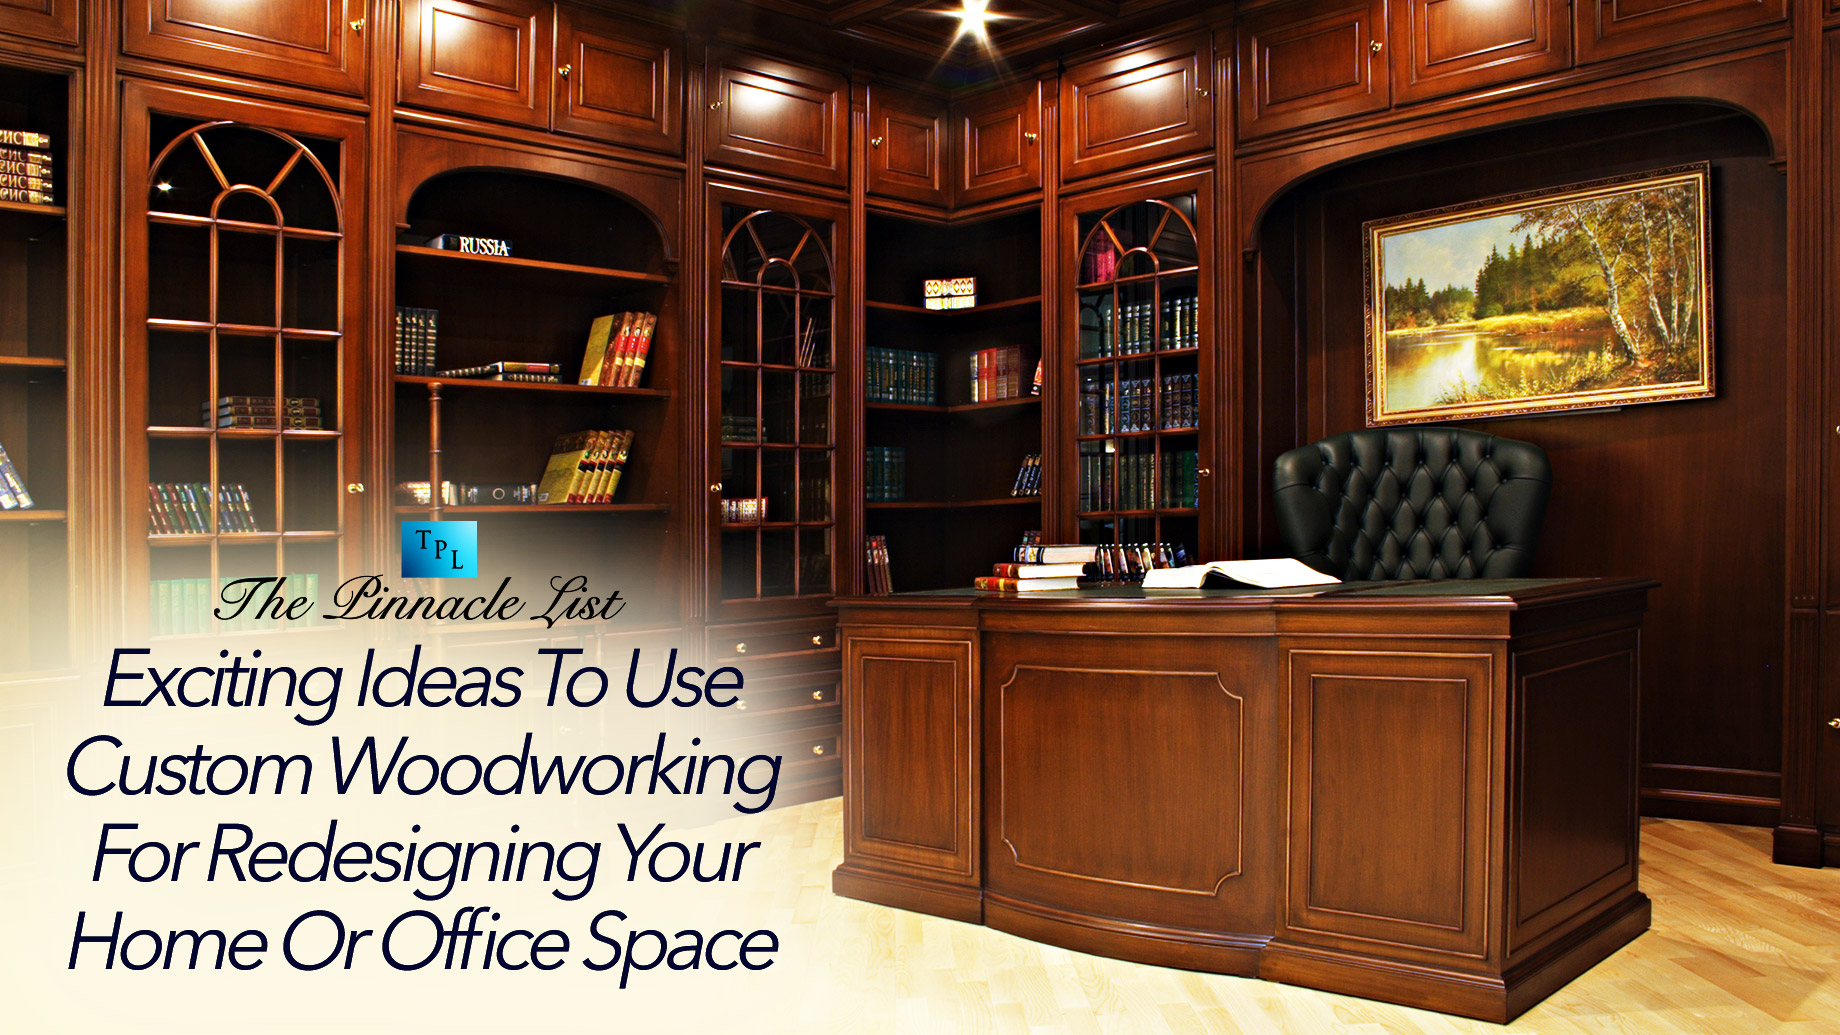 Exciting Ideas To Use Custom Woodworking For Redesigning Your Home Or Office Space